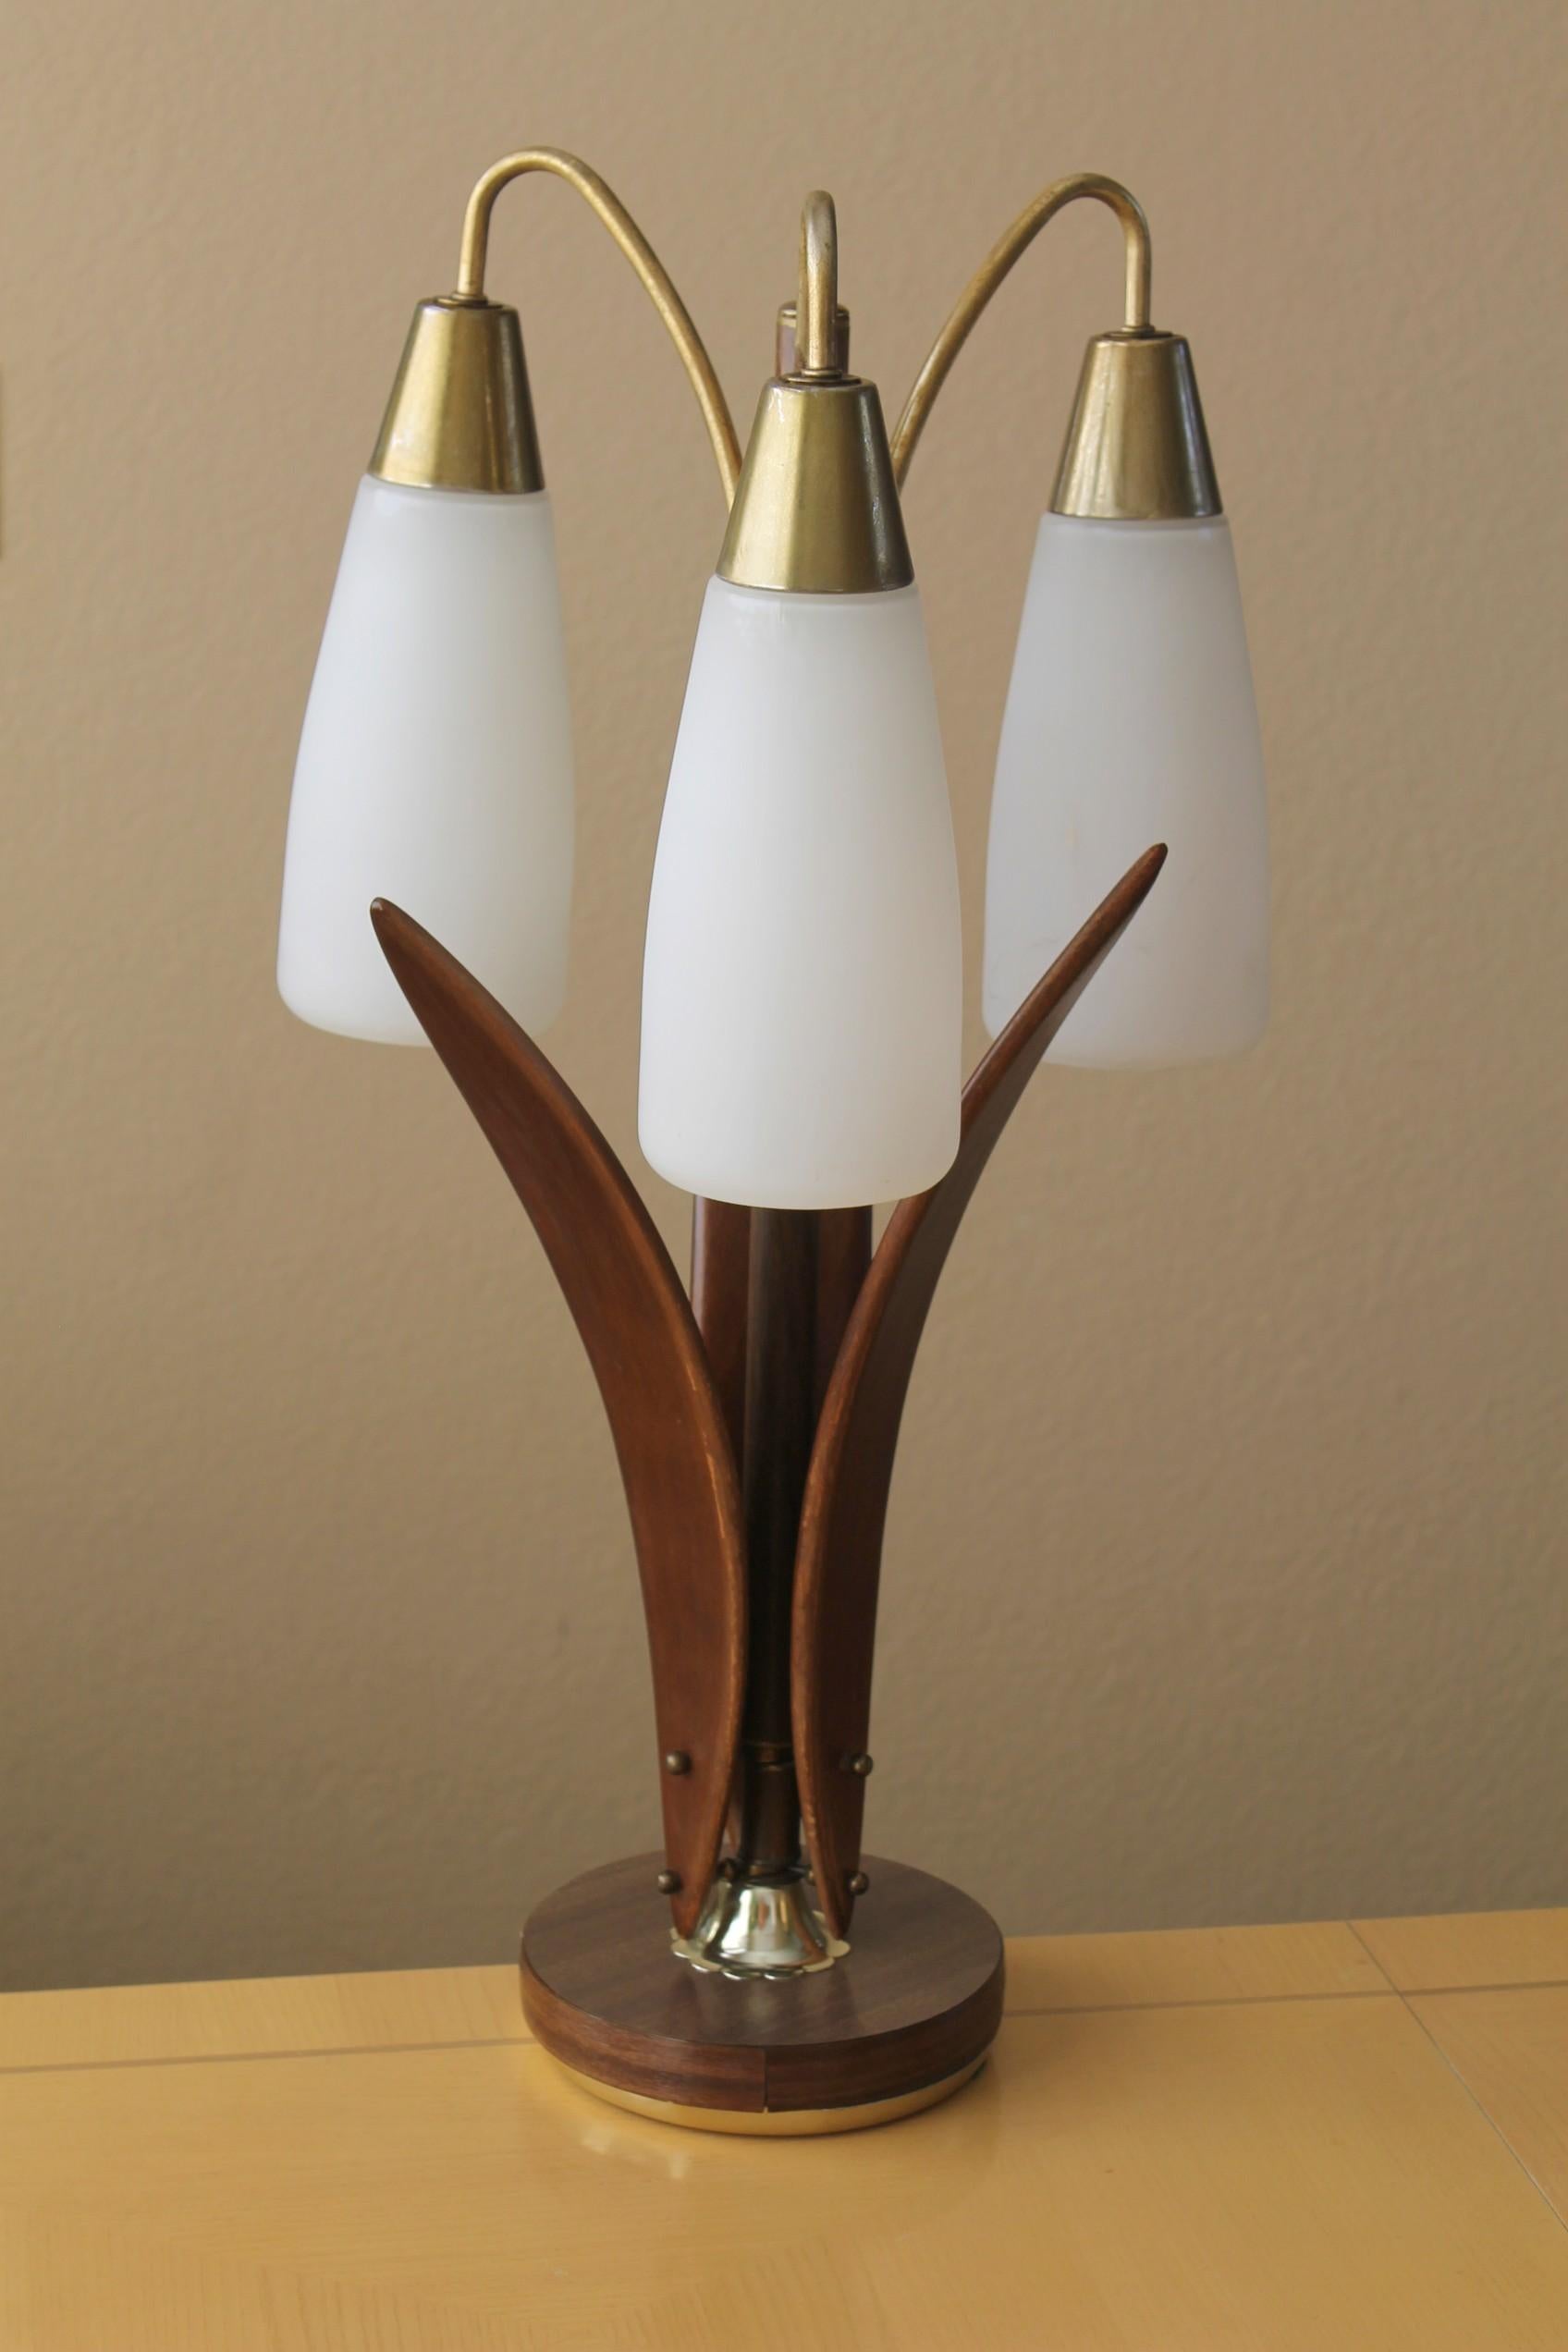 Gorgeous!

DANISH MODERN
3 SHADE GLASS and WALNUT TABLE LAMP


In the Manner of Modeline Lamp Co.

This lamp is a striking example of the best of Mid Century Modern Danish Modern design!  Great design elements provide a sleek, svelte table lamp that